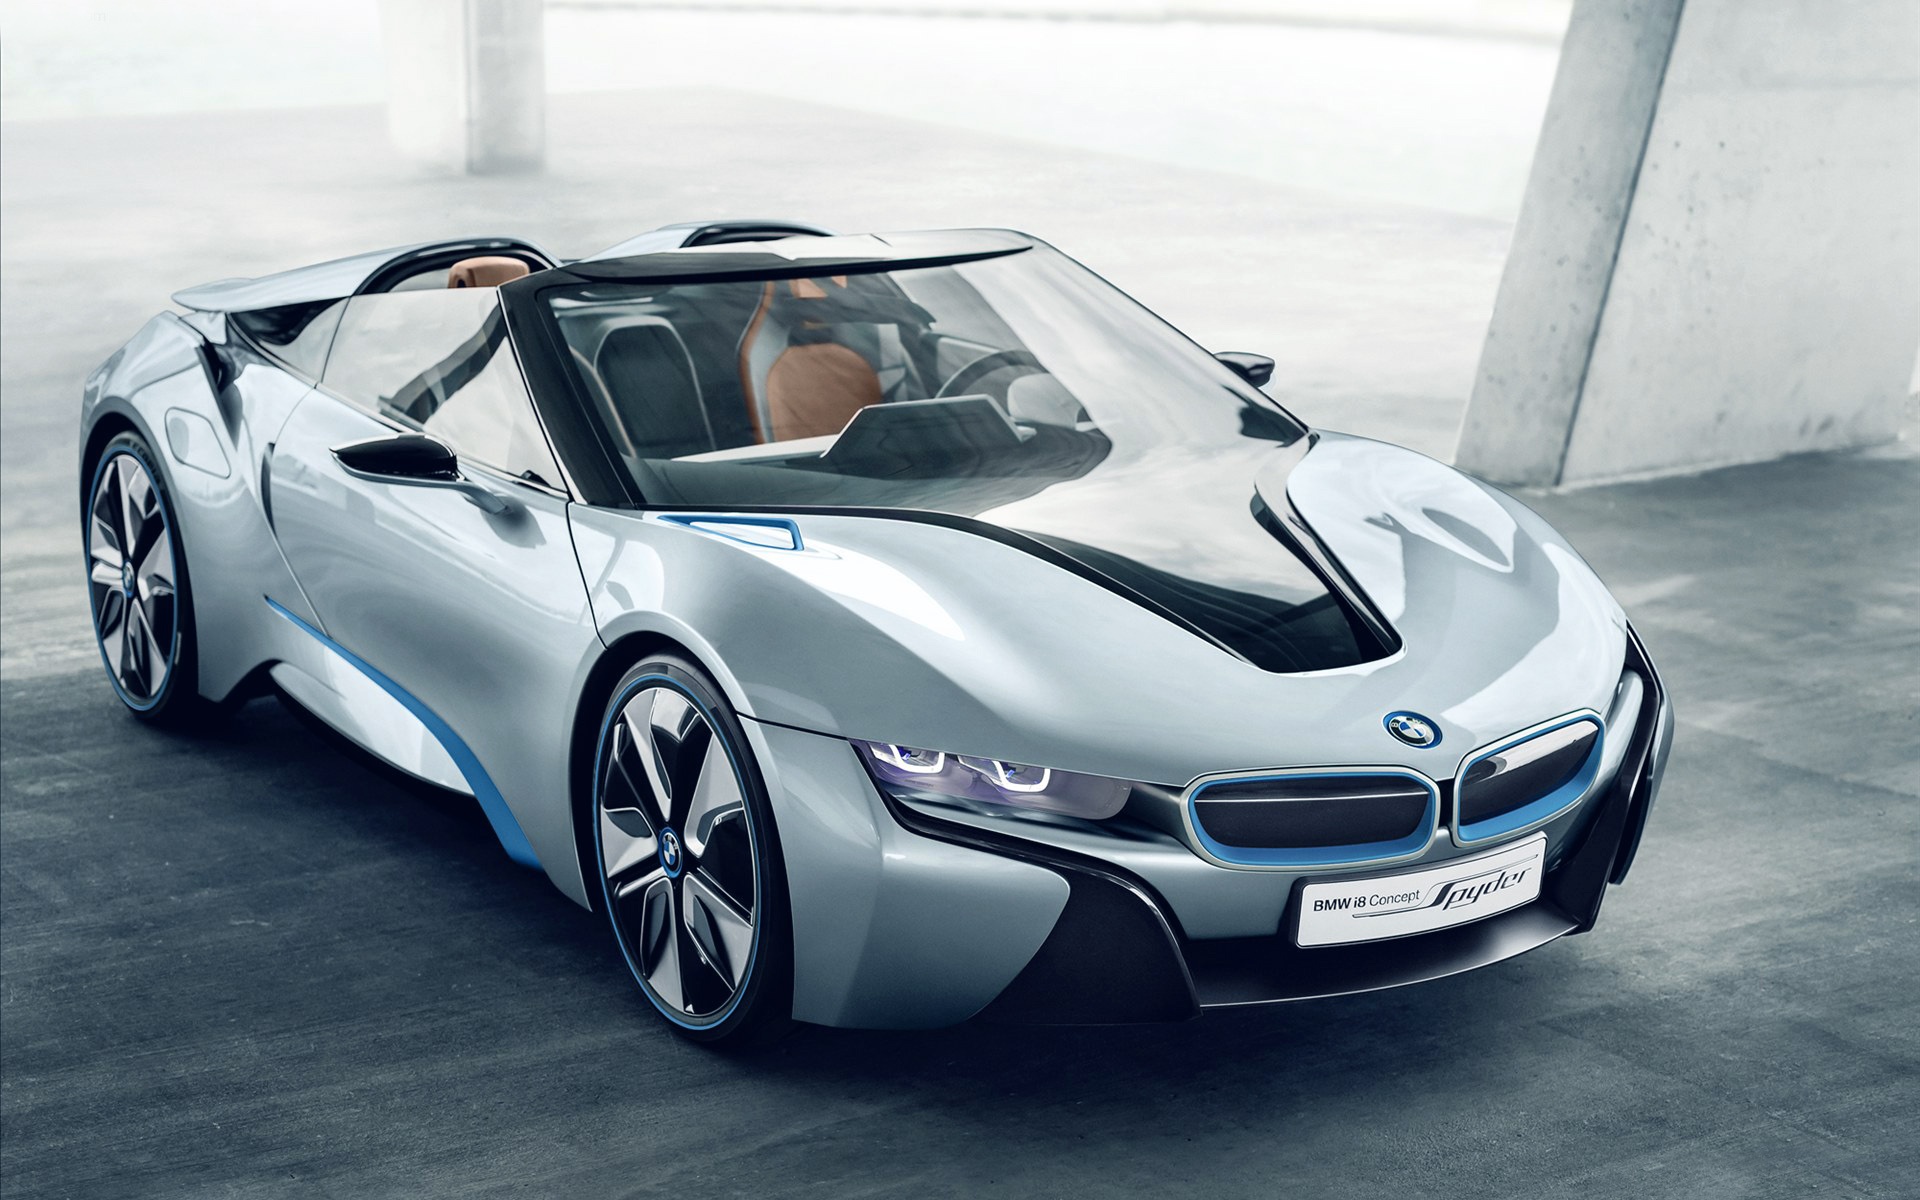 BMW i8 Spyder Concept Car Wallpapers HD Wallpapers